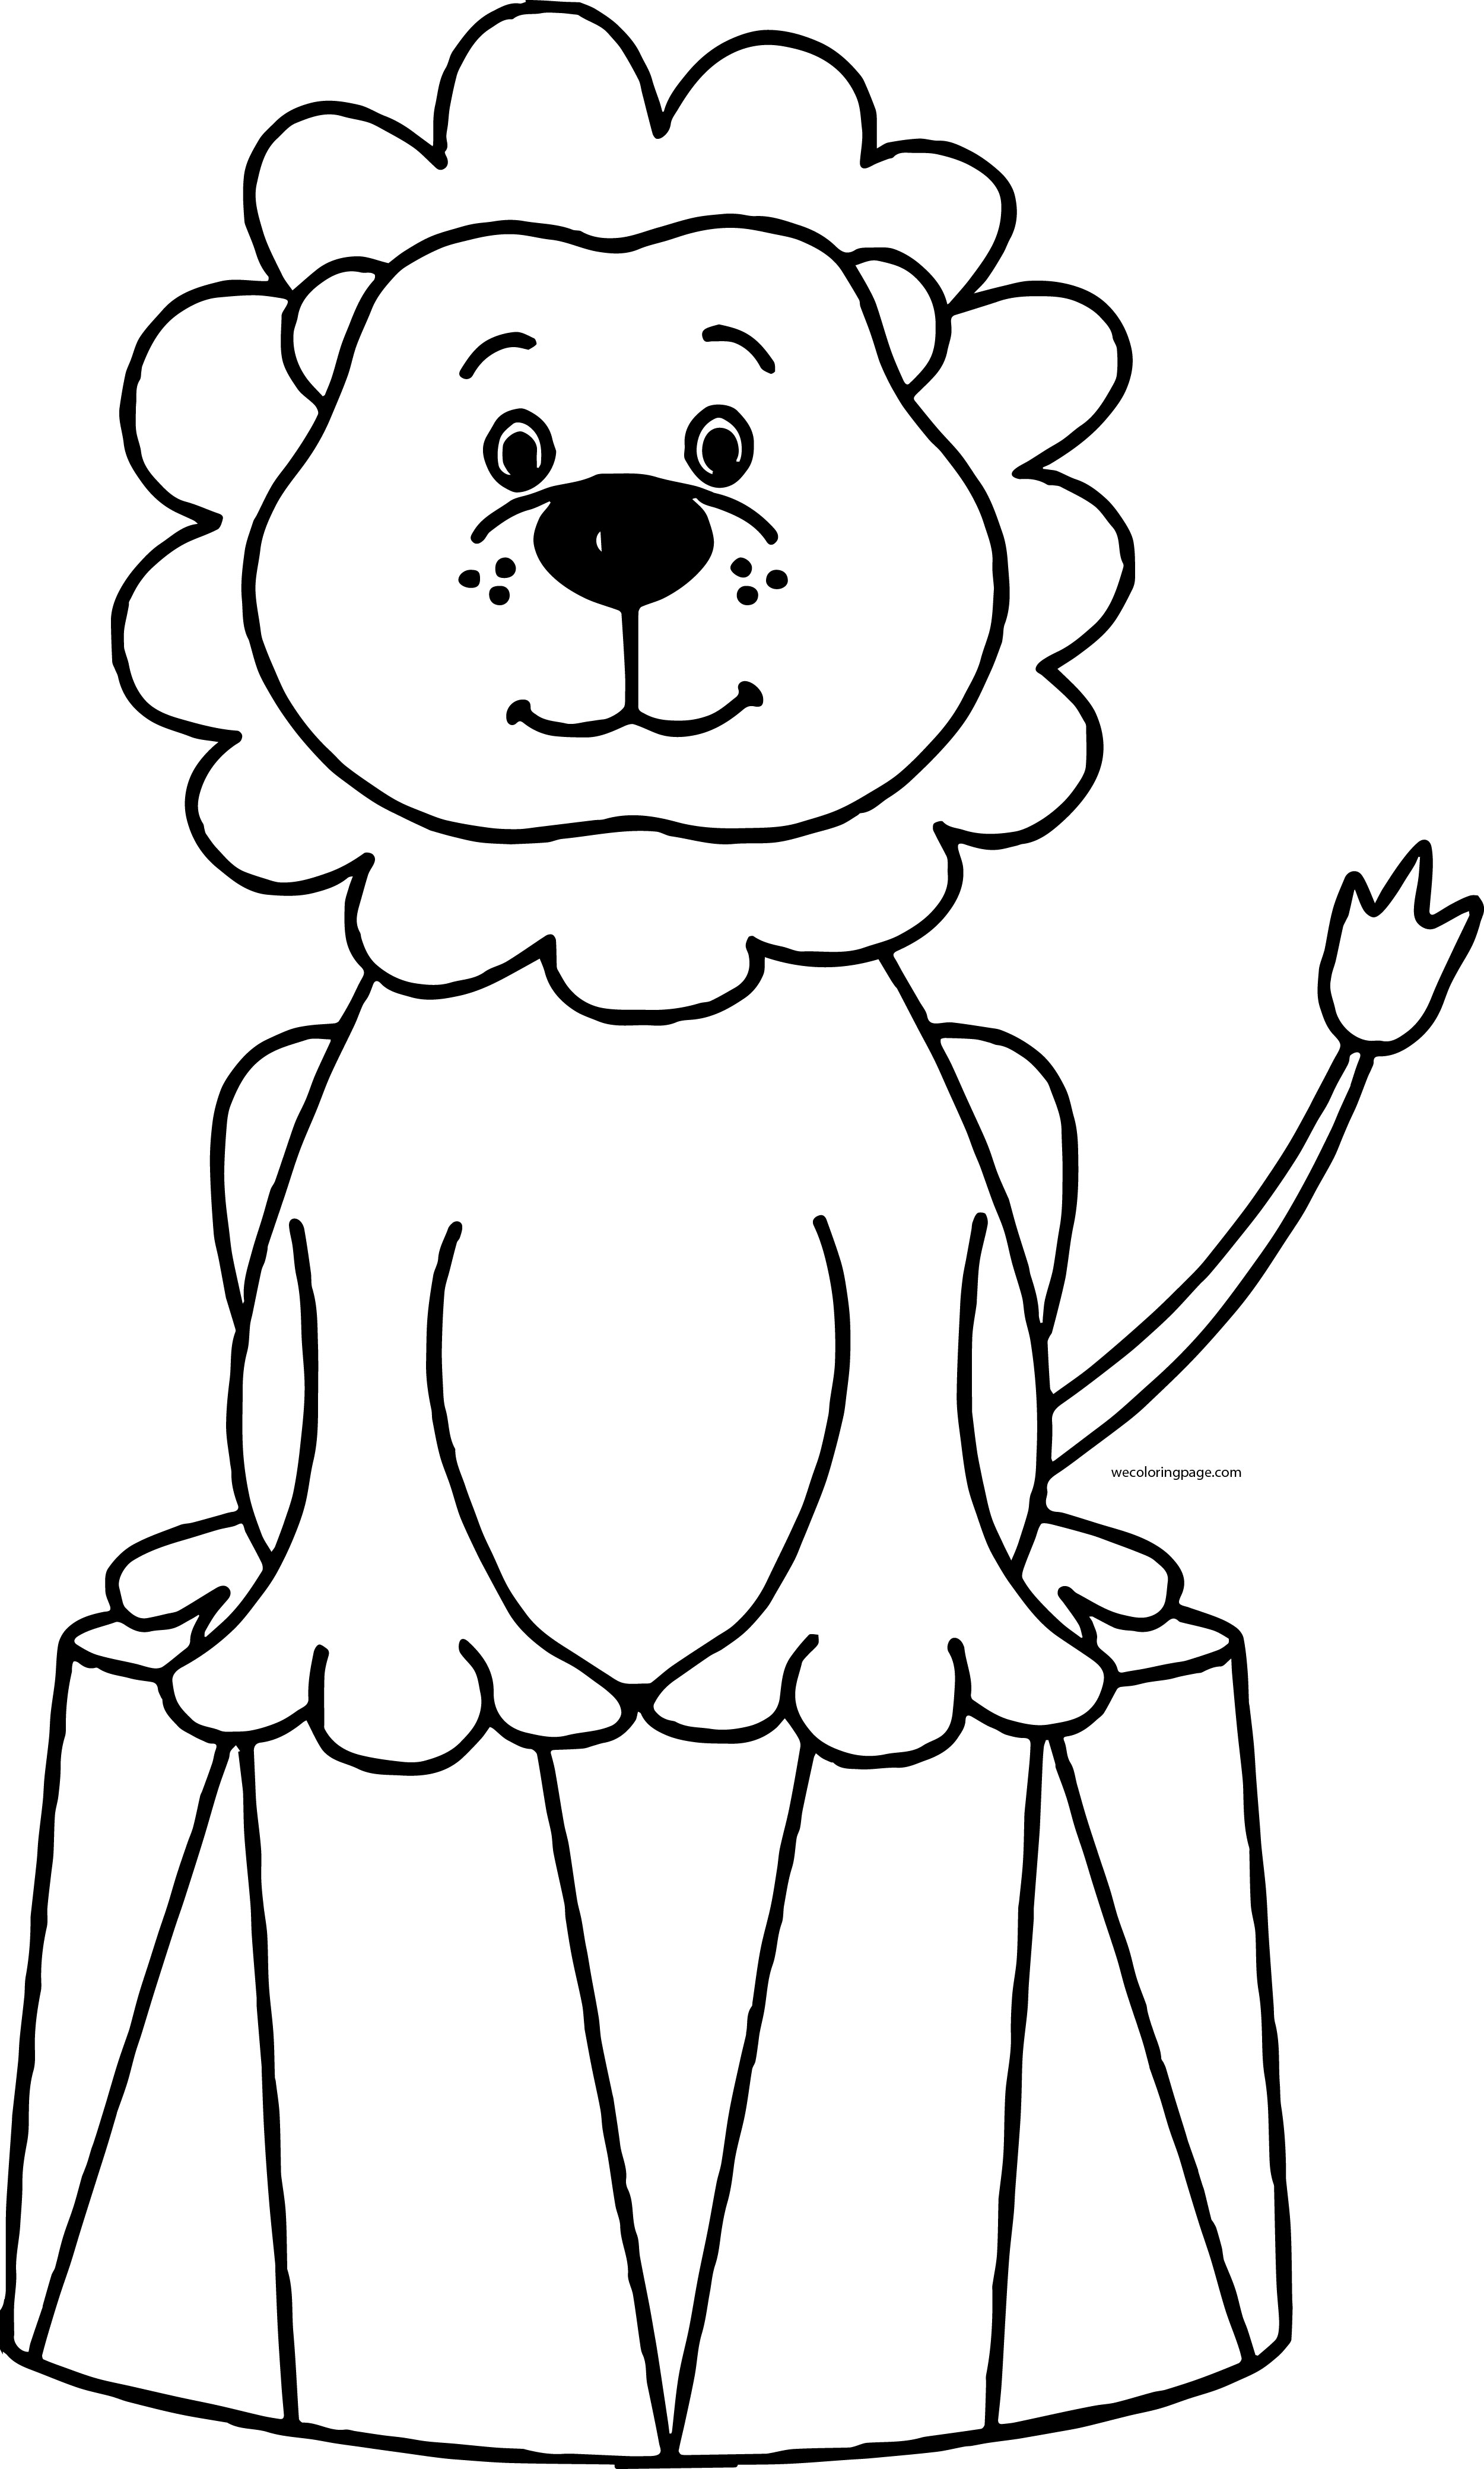 Lion  black and white circus lion clipart black and white